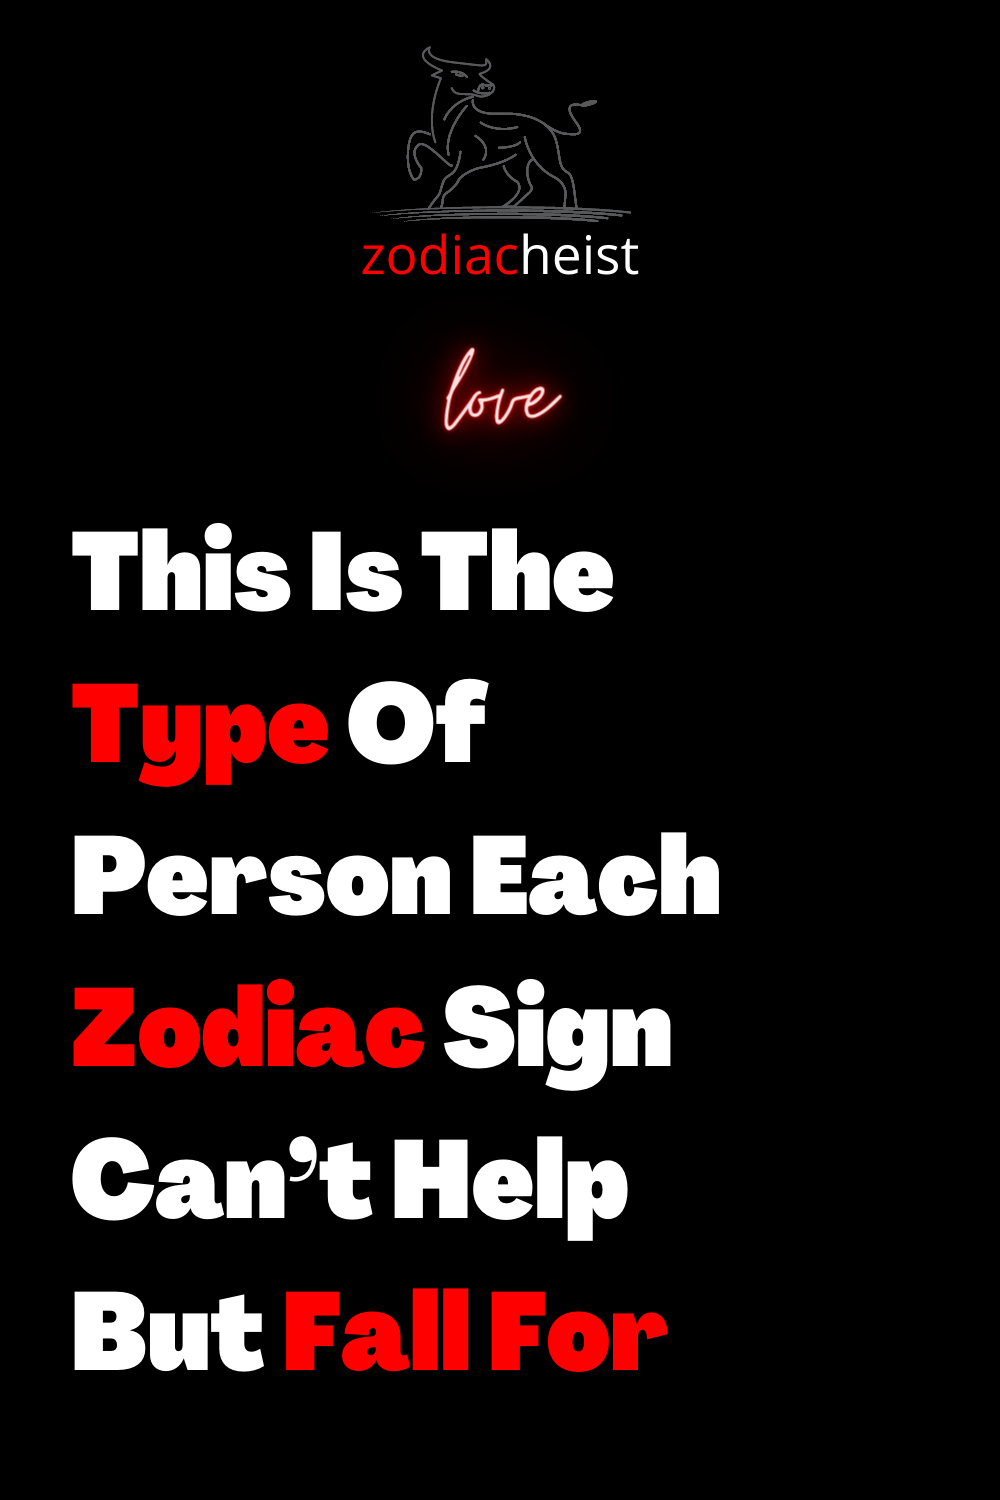 This Is The Type Of Person Each Zodiac Sign Can’t Help But Fall For